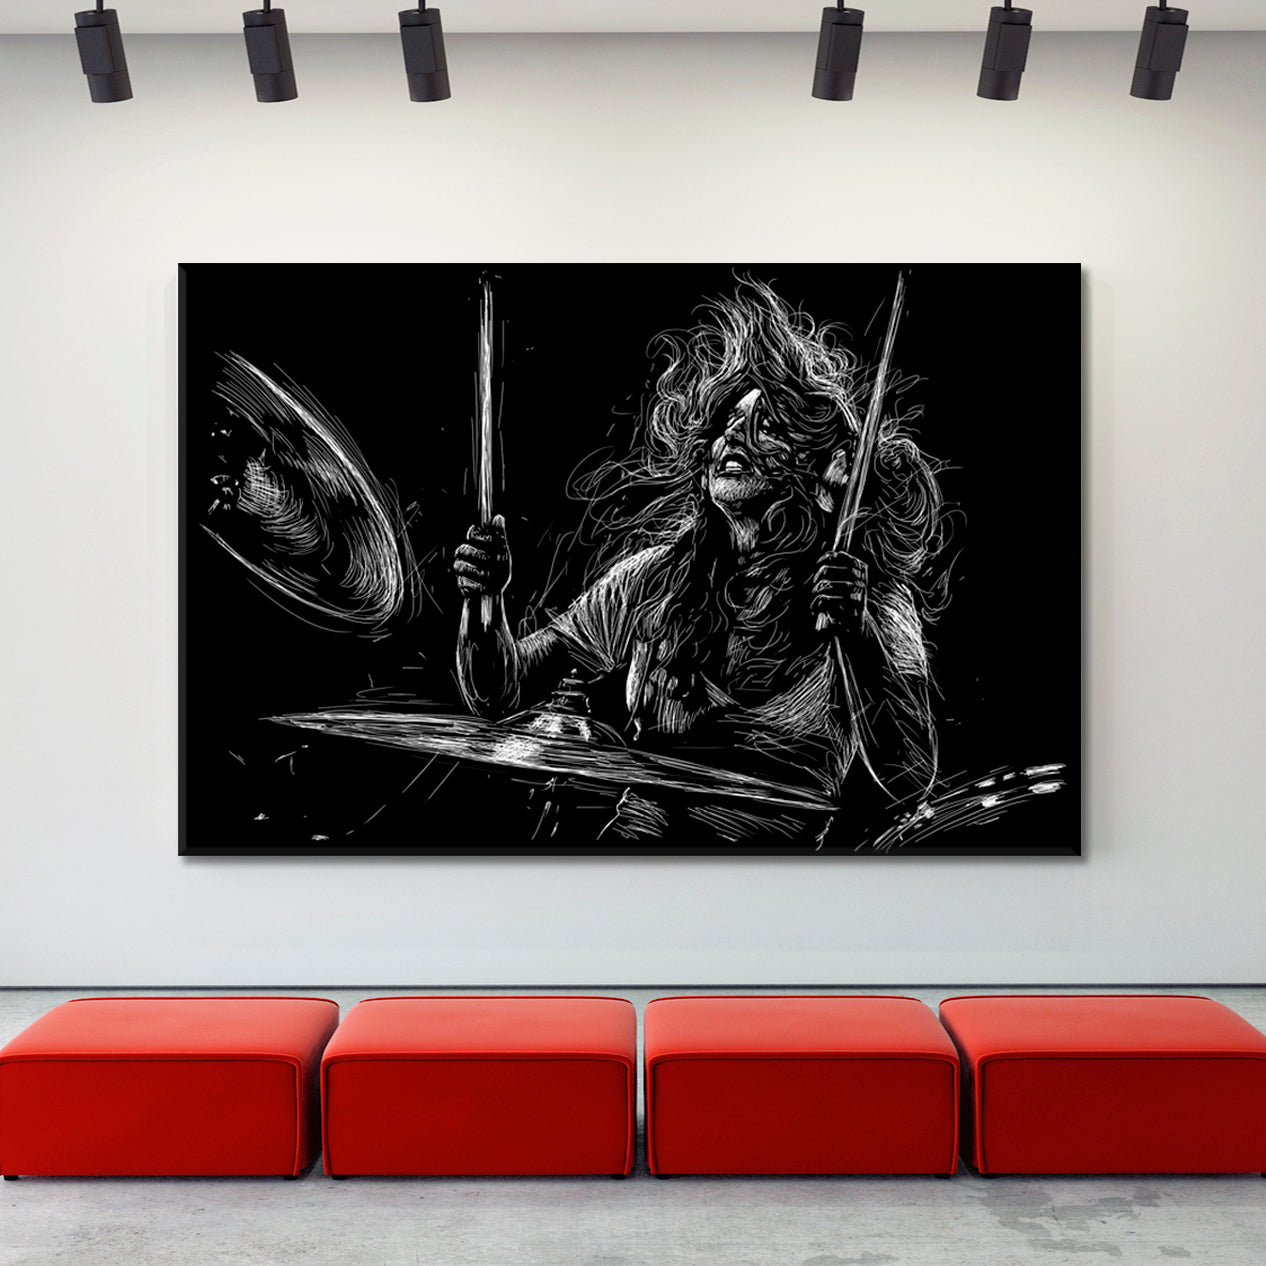 MUSIC SOUNDS Musician with Drums Rock Drummer Player Music Poster Music Wall Panels Artesty   